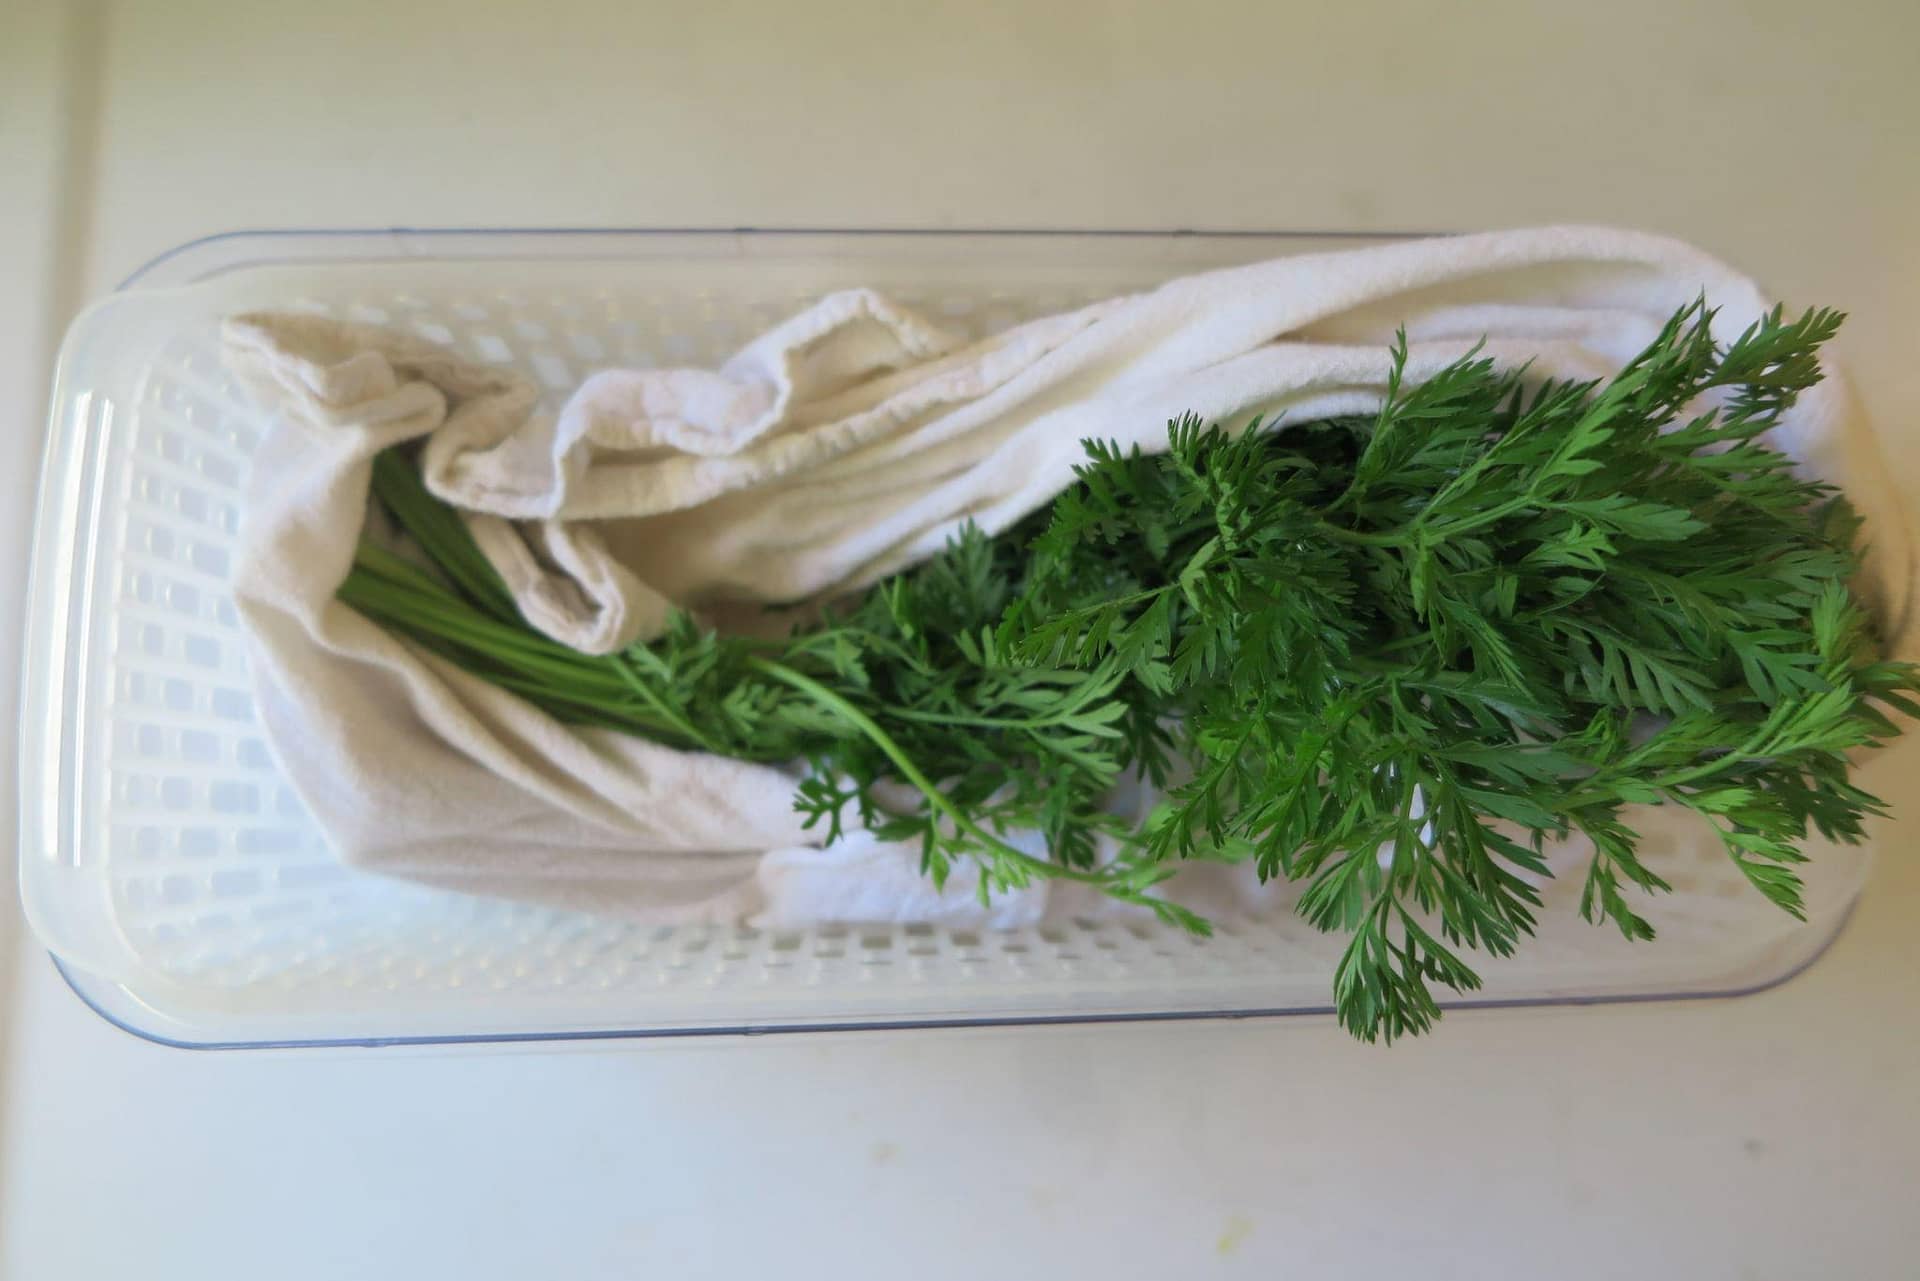 Carrot tops wrapped in a flour sack towel in a storage container